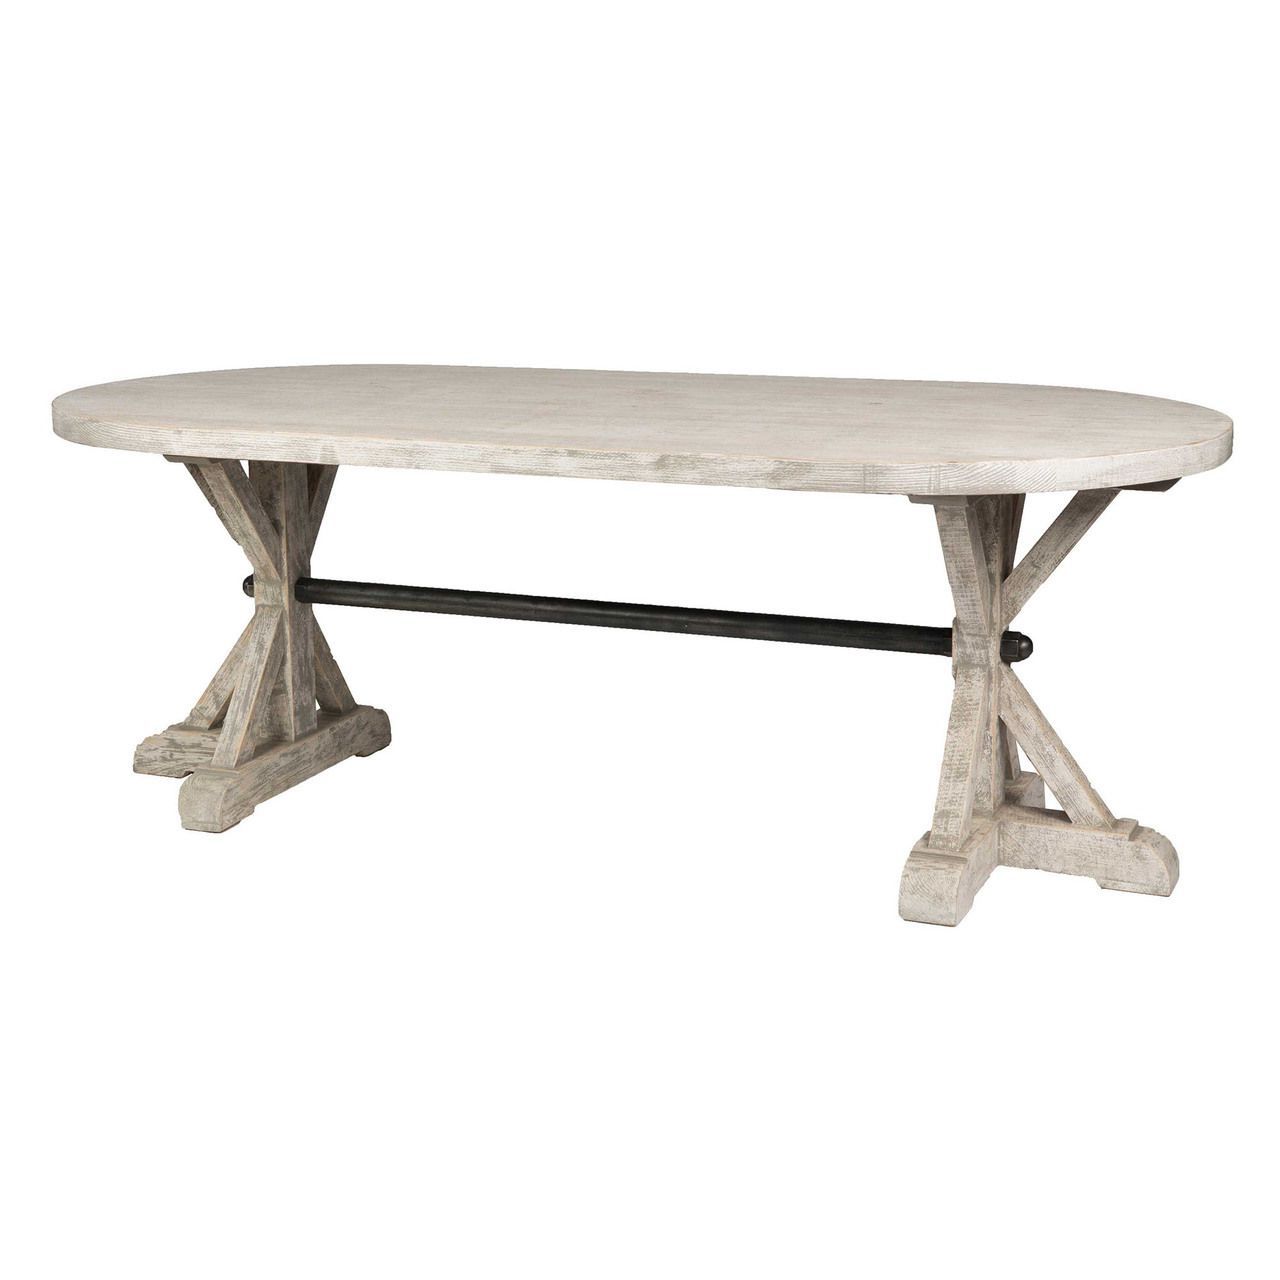 Dining Table Within Best And Newest Distressed Grey Finish Wood Classic Design Dining Tables (View 7 of 25)